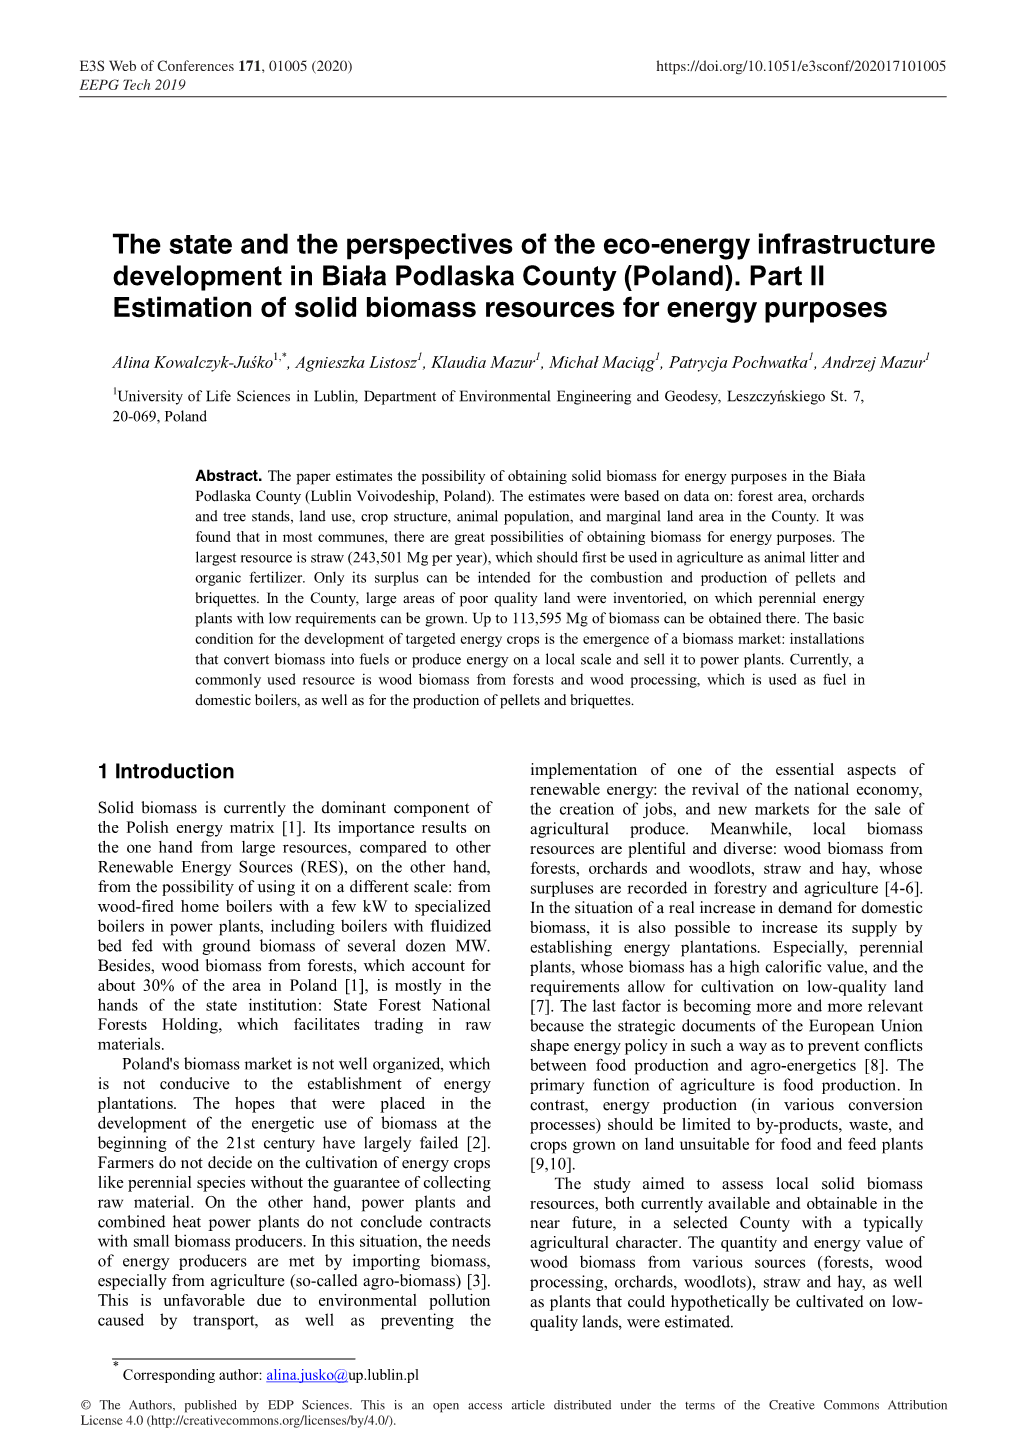 The State and the Perspectives of the Eco-Energy Infrastructure Development in Biała Podlaska County (Poland)